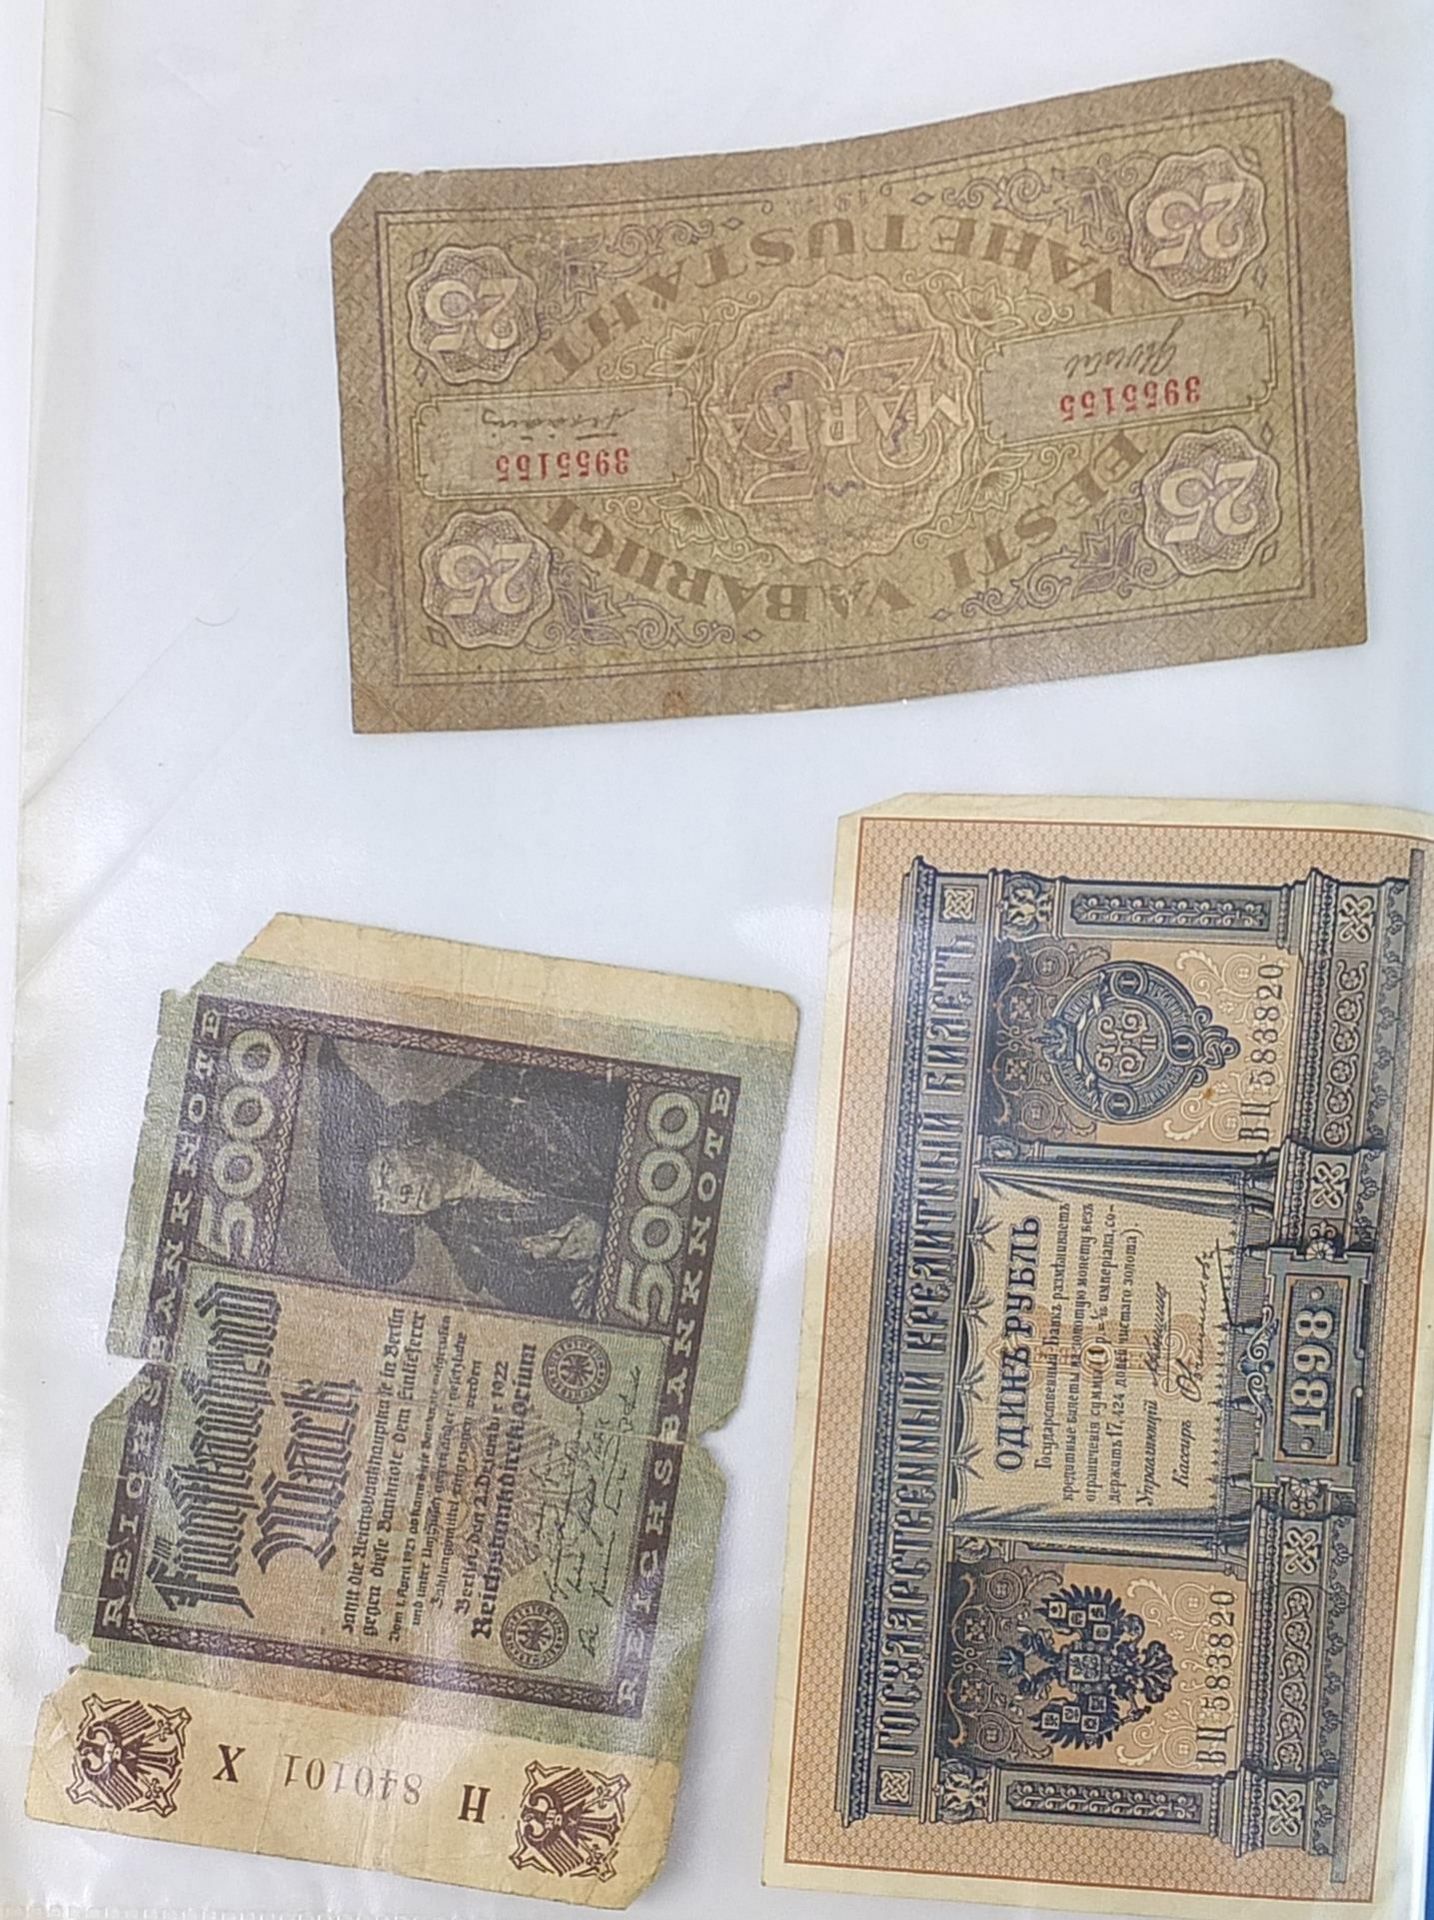 World banknotes including German and Russian examples - Image 16 of 16